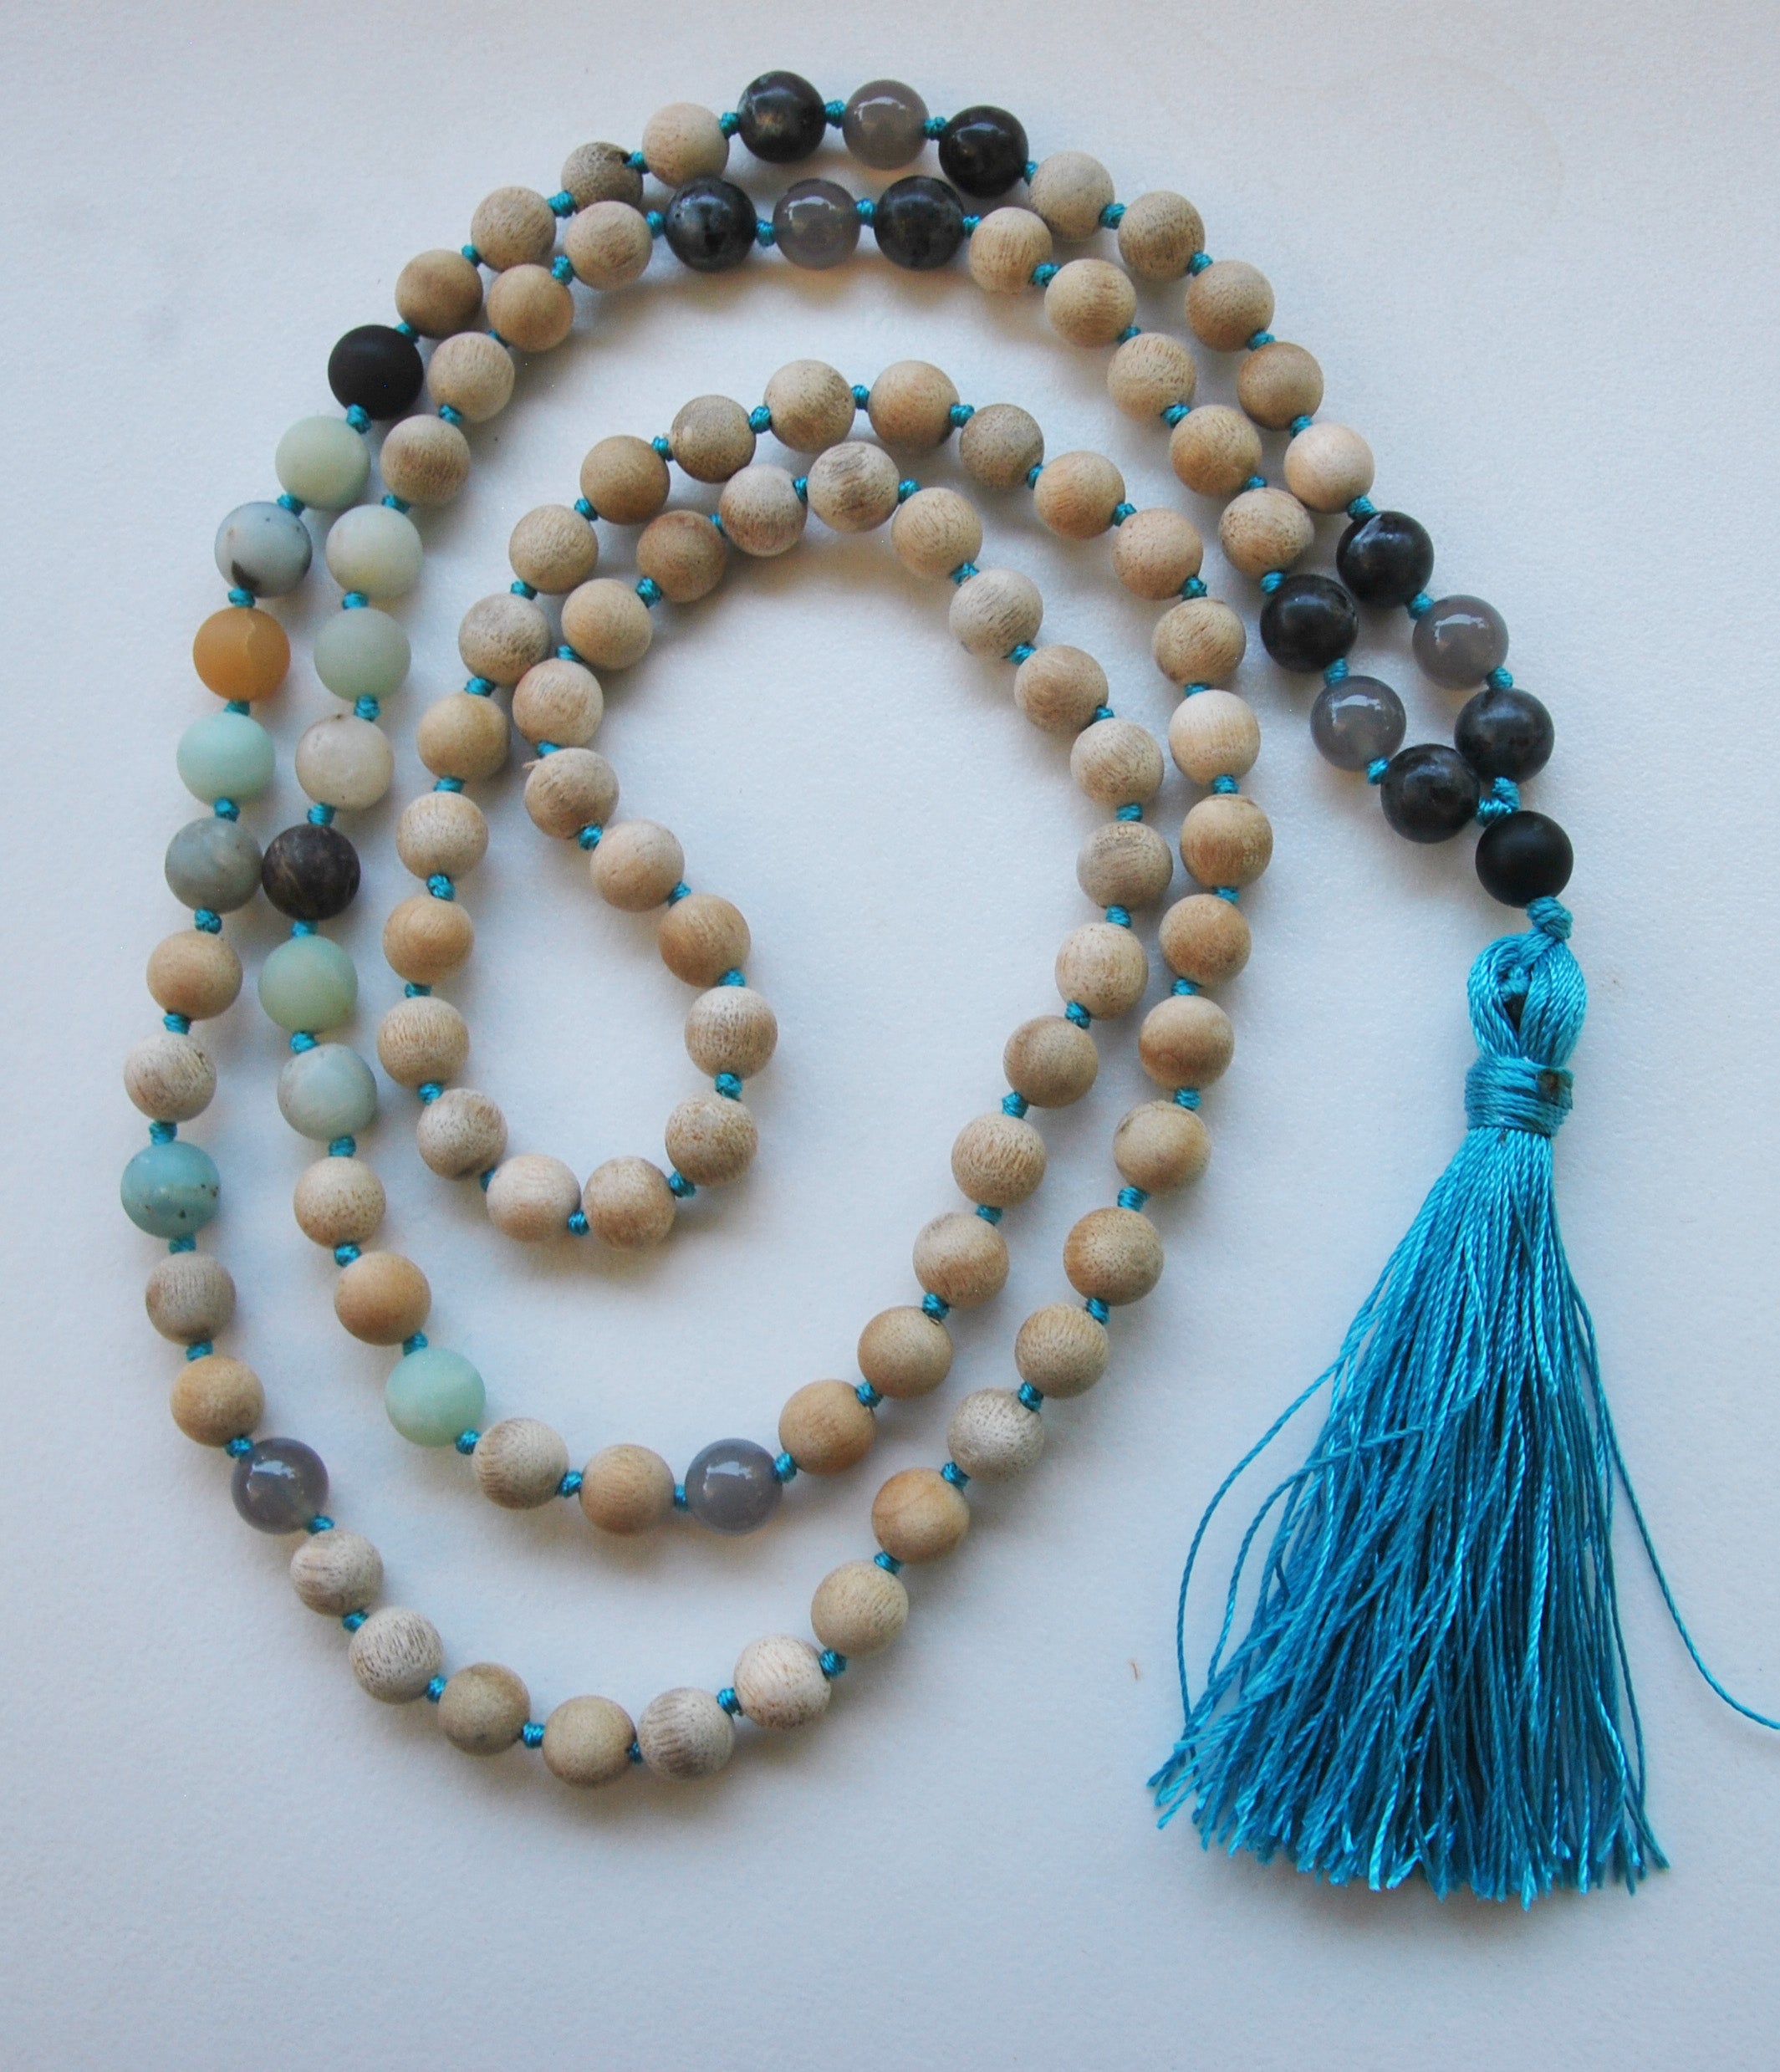 8mm Sandalwood & Amazonite 108 Knotted Mala Necklace with Colored Tassel